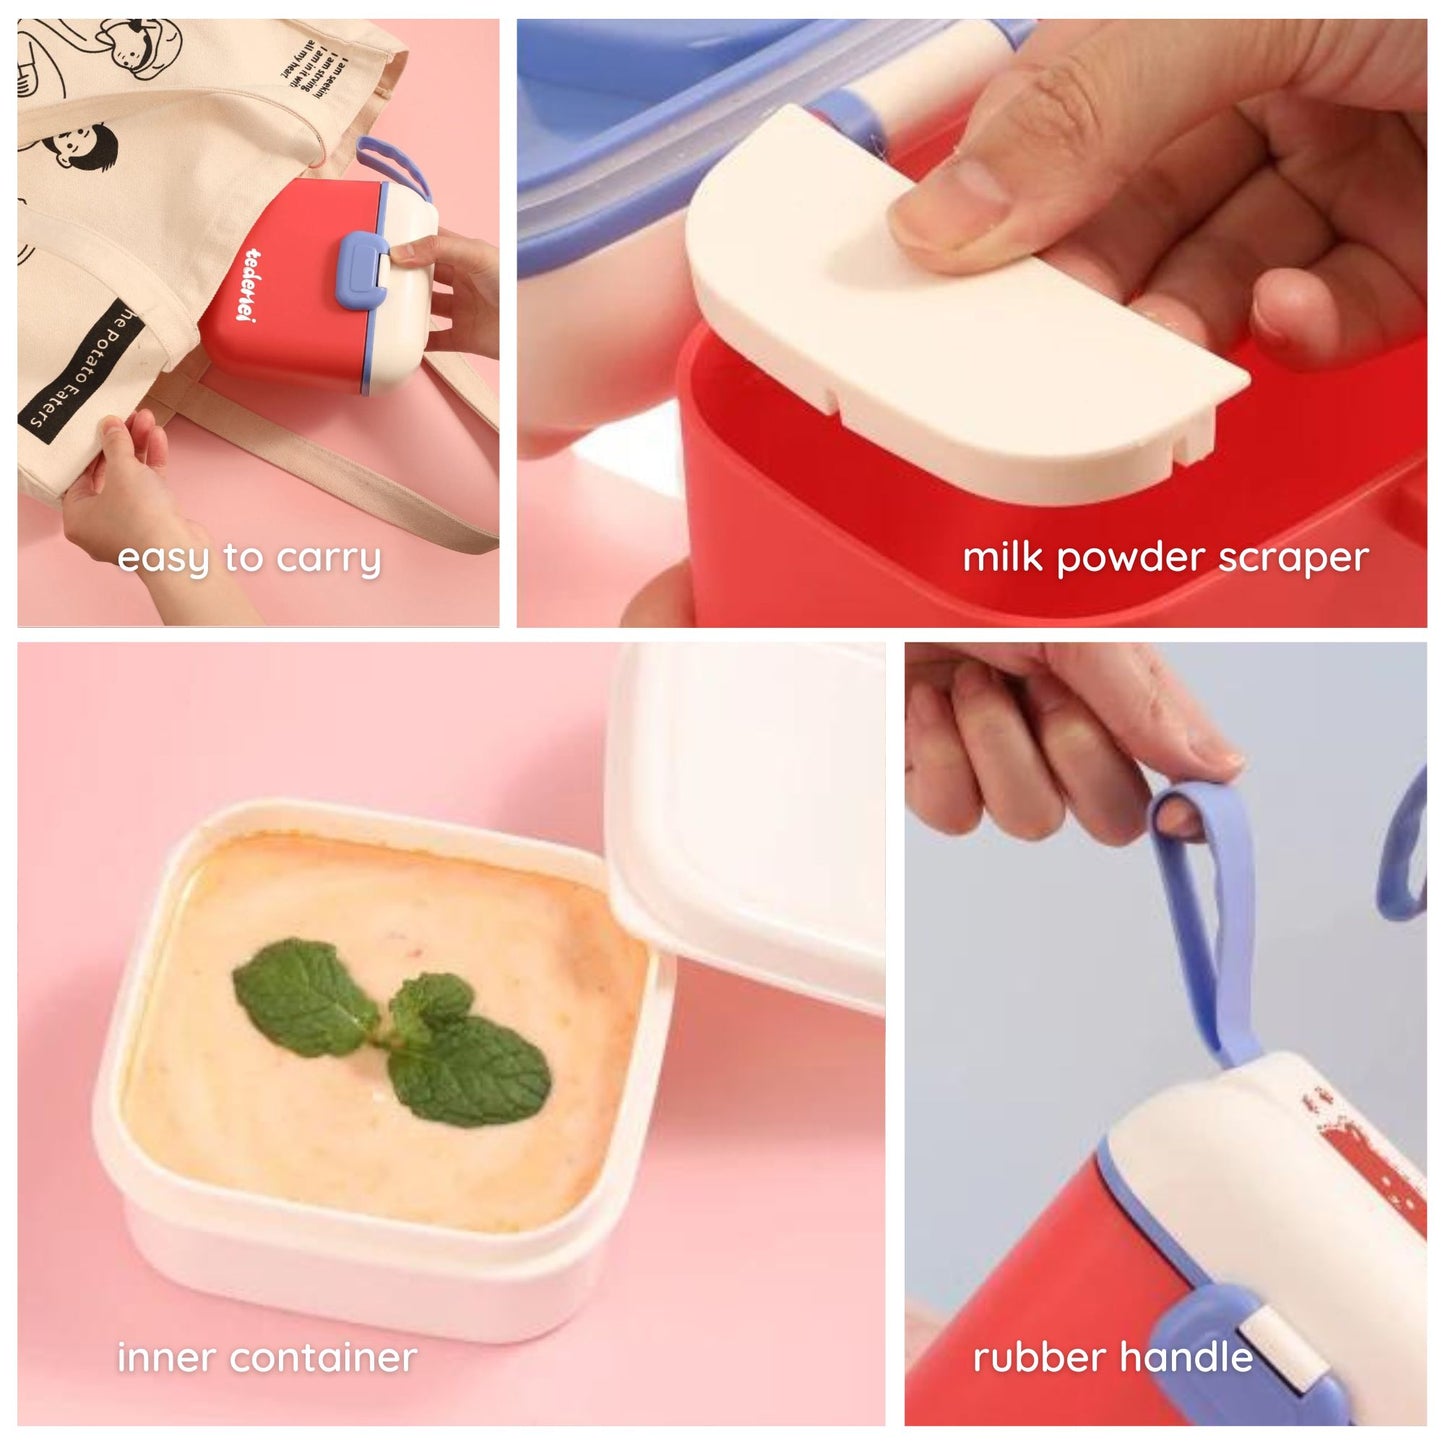 Cute Portable Snack Container with Separate Compartments and Accessories - Available in 450ml and 800ml Sizes